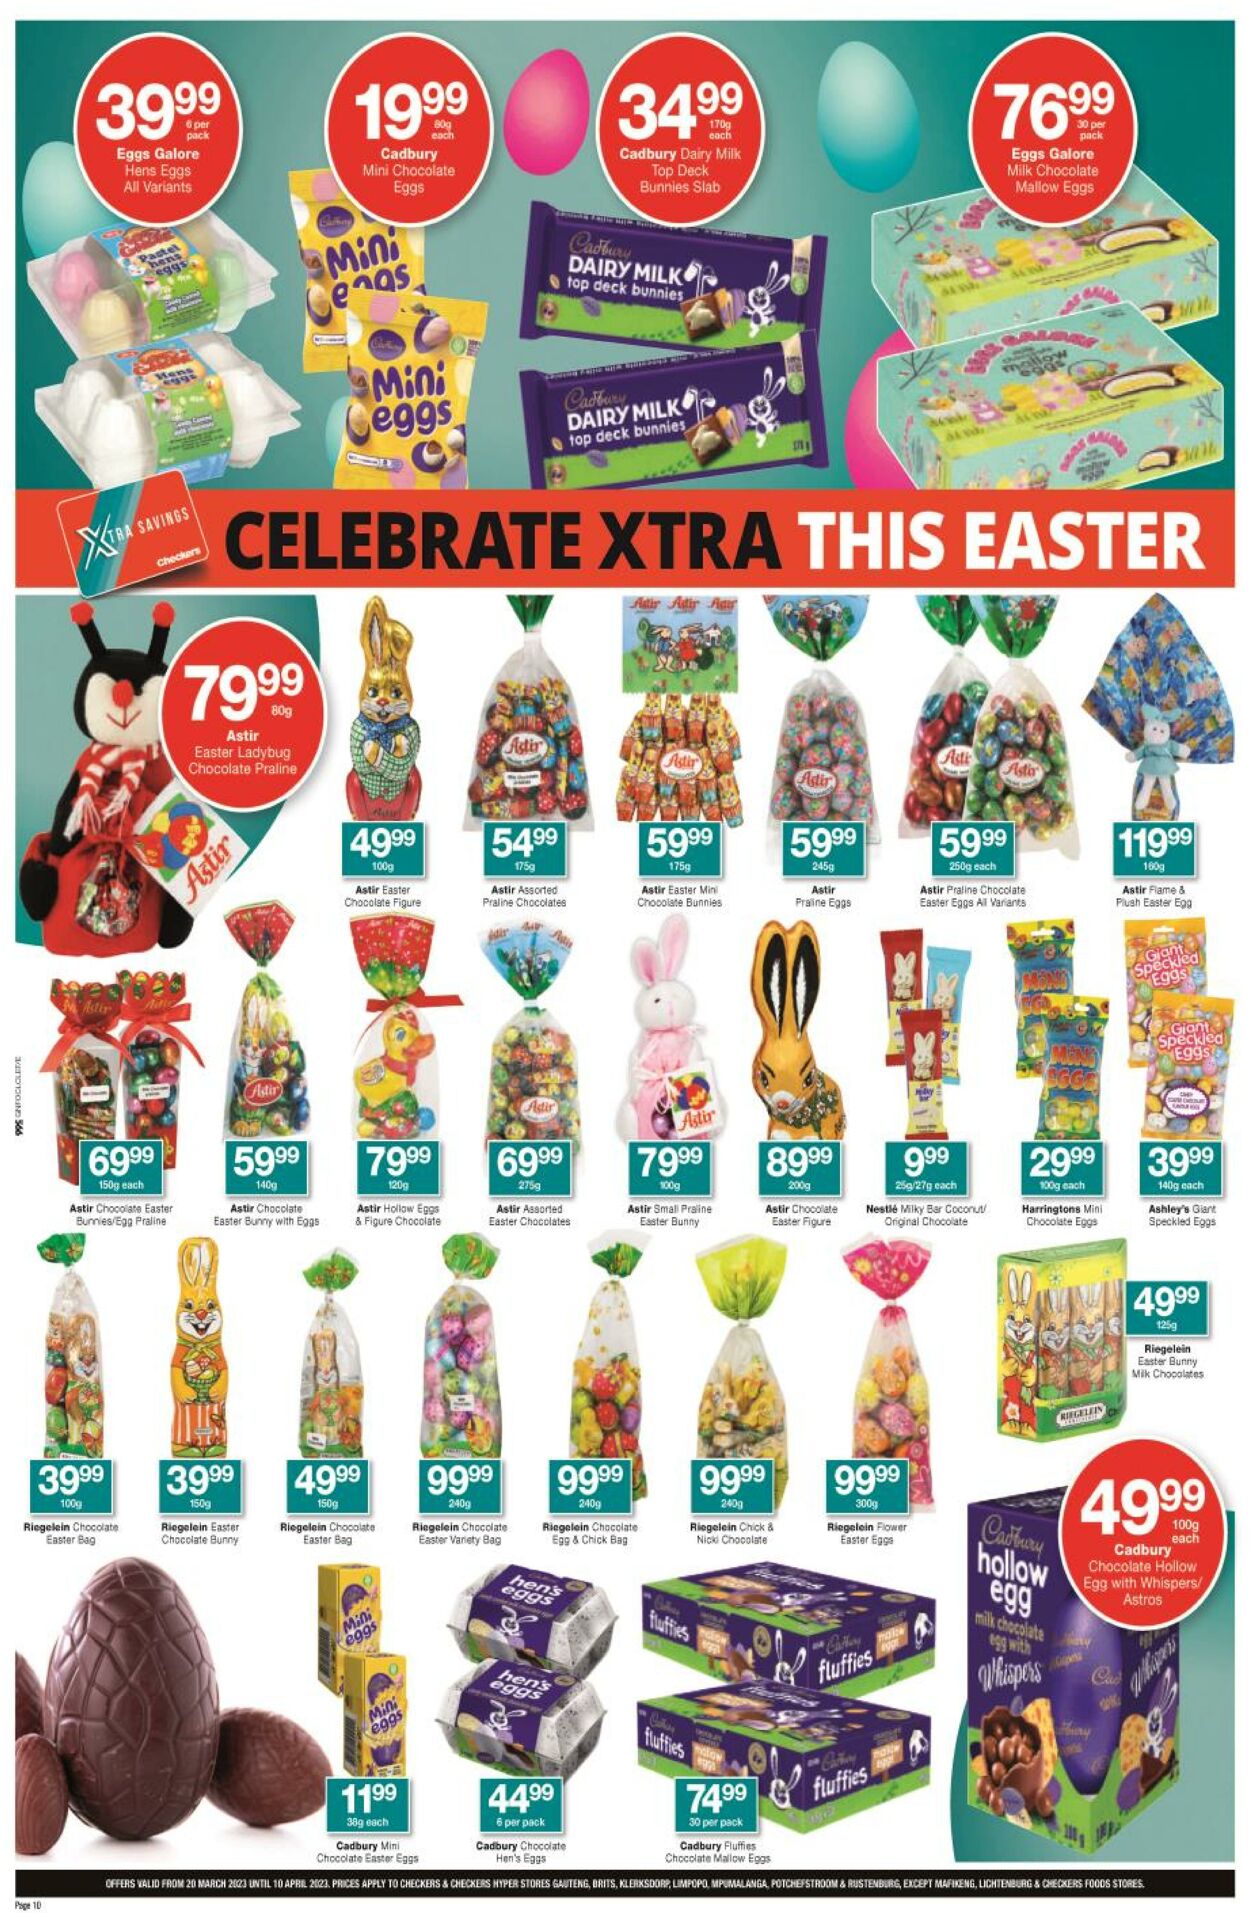 Checkers Promotional Leaflet - Easter 2023 - Valid from 20.03 to 10.04 ...